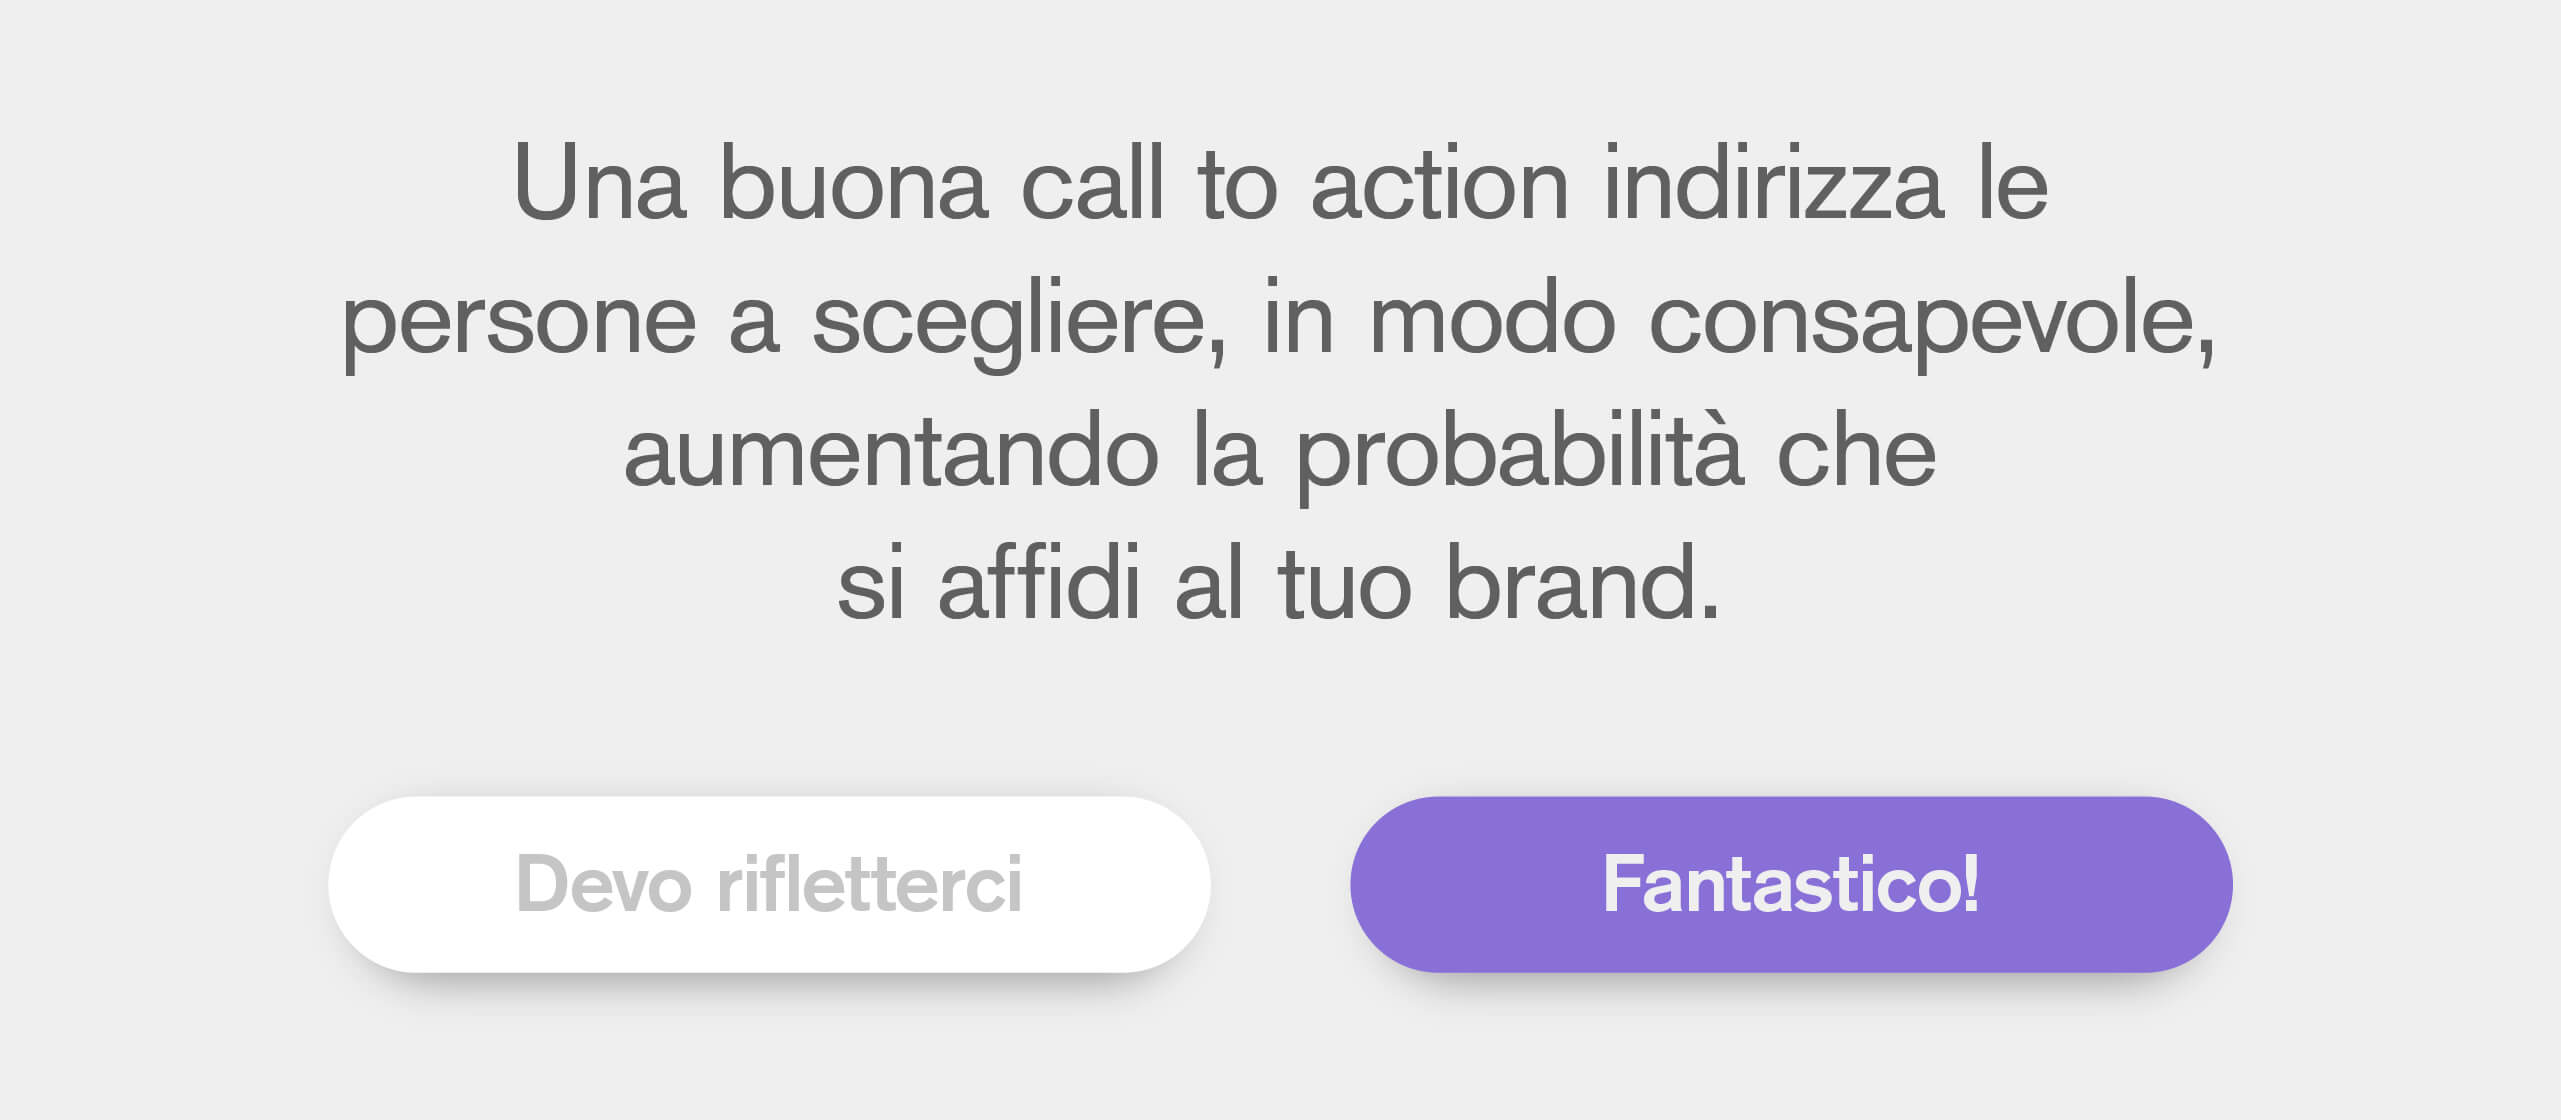 call to action efficaci